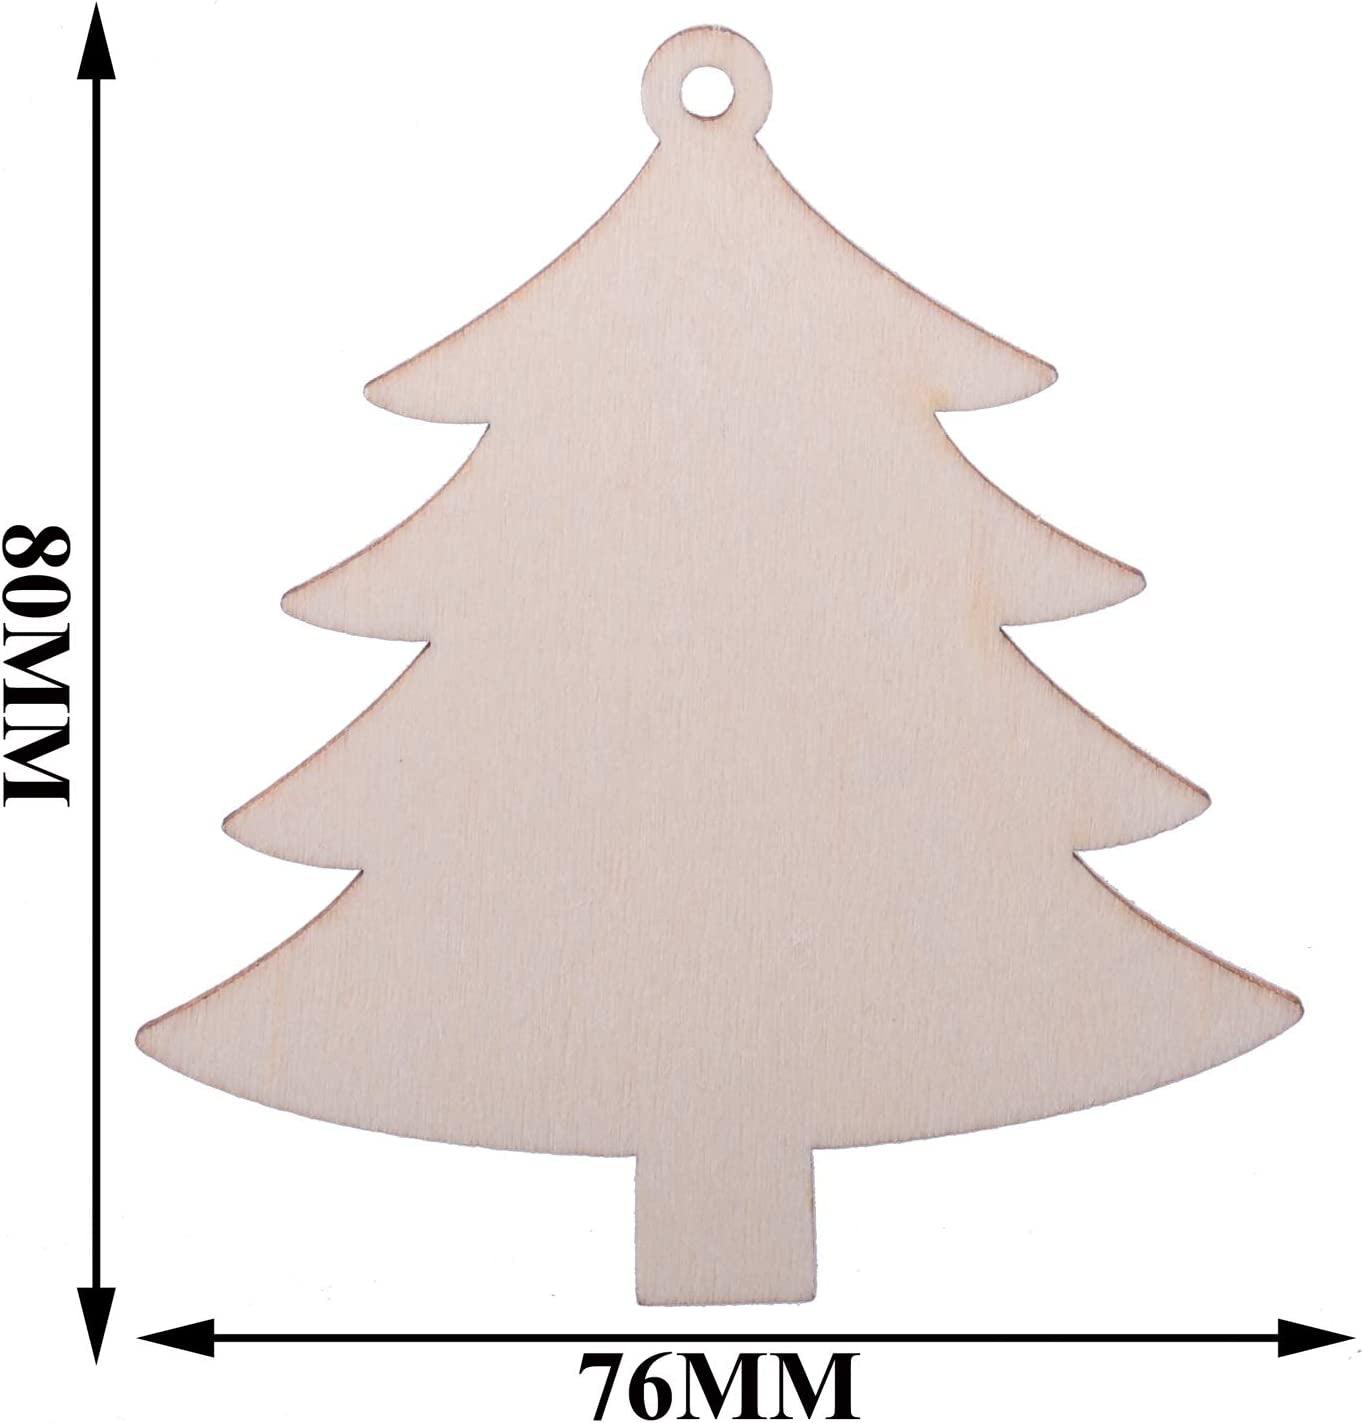 Pack of 50 Wooden Crafts to Paint Christmas Tree Hanging Ornaments Unfinished Wood Cutouts Decoration DIY Crafts - WoodArtSupply